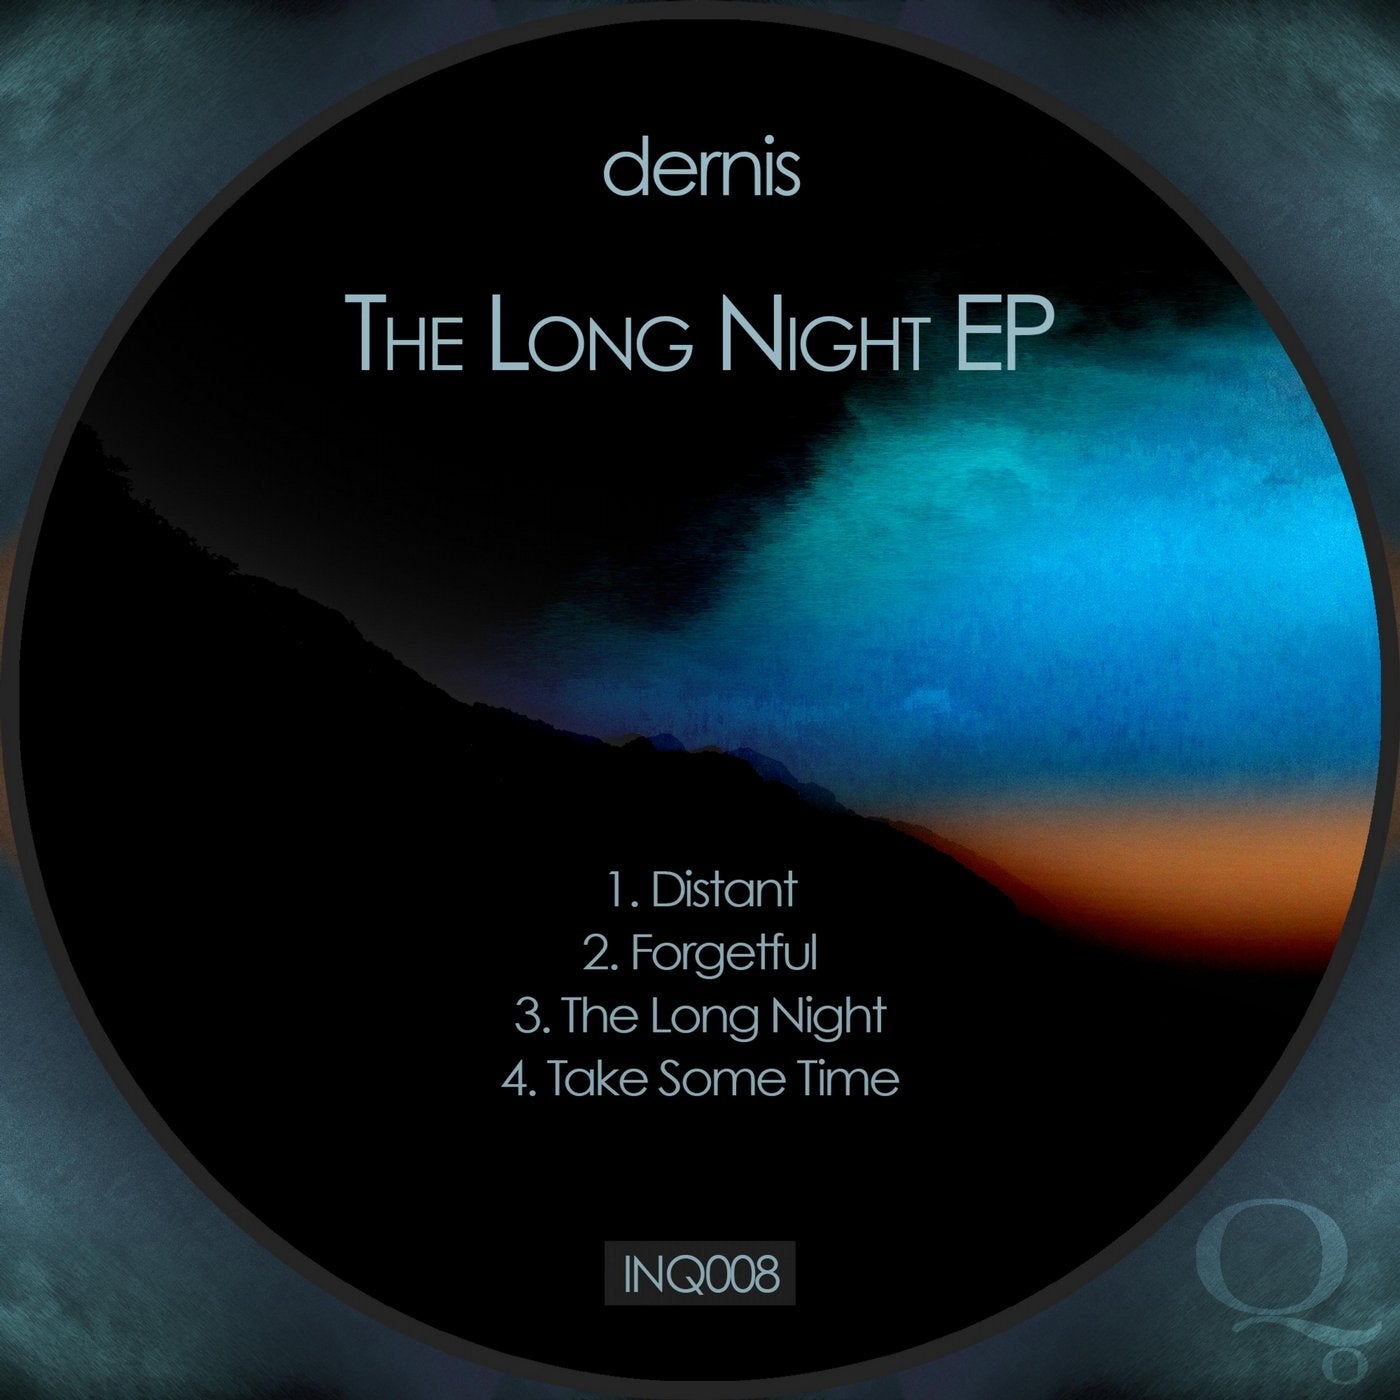 The Long Night EP